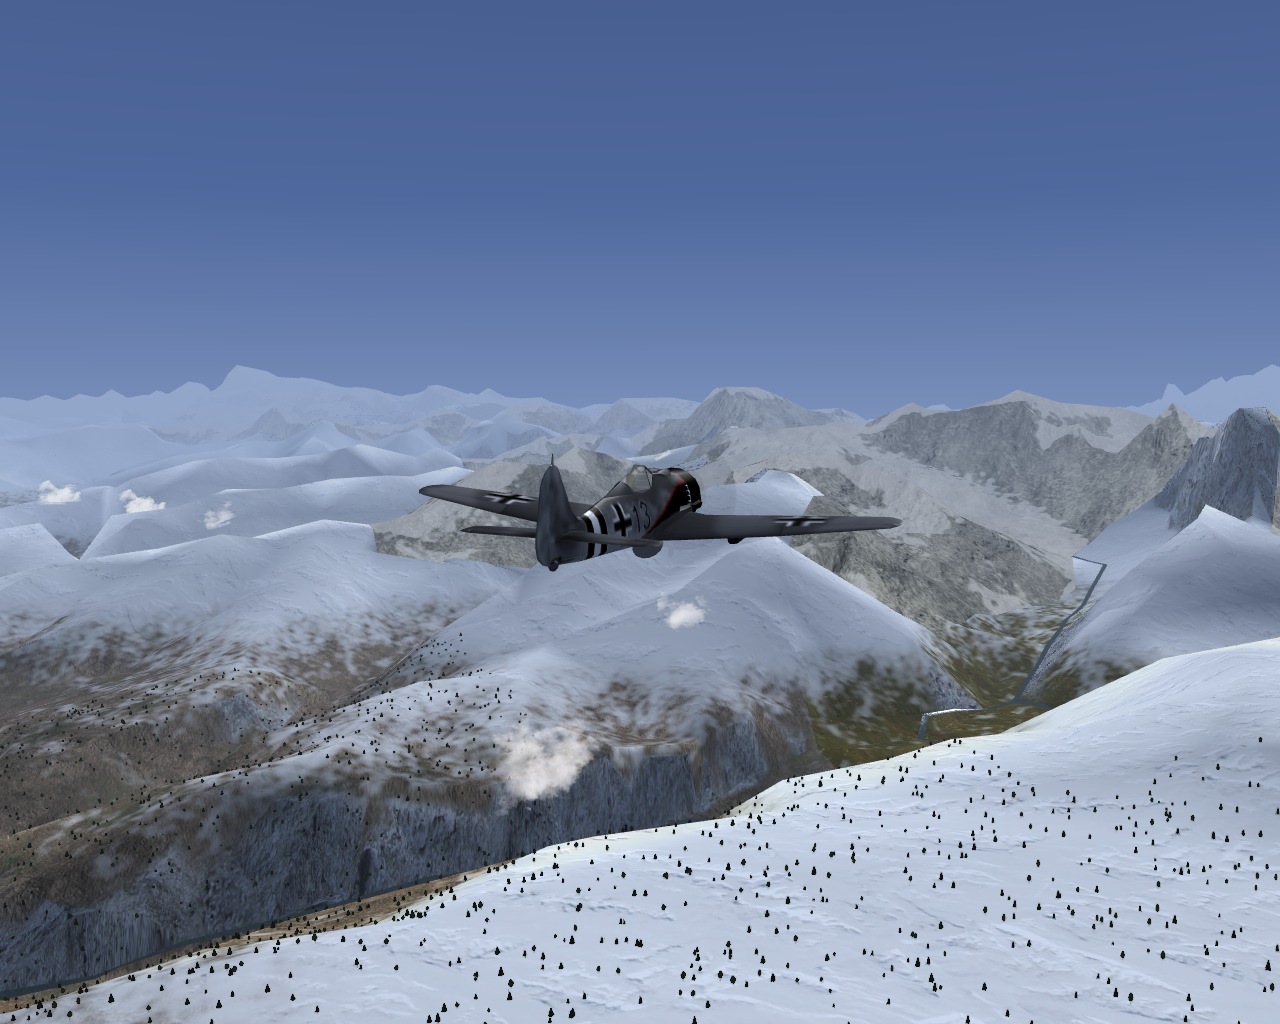 Approaching a bank of snow-covered mountains in the south of the Hindu Kush